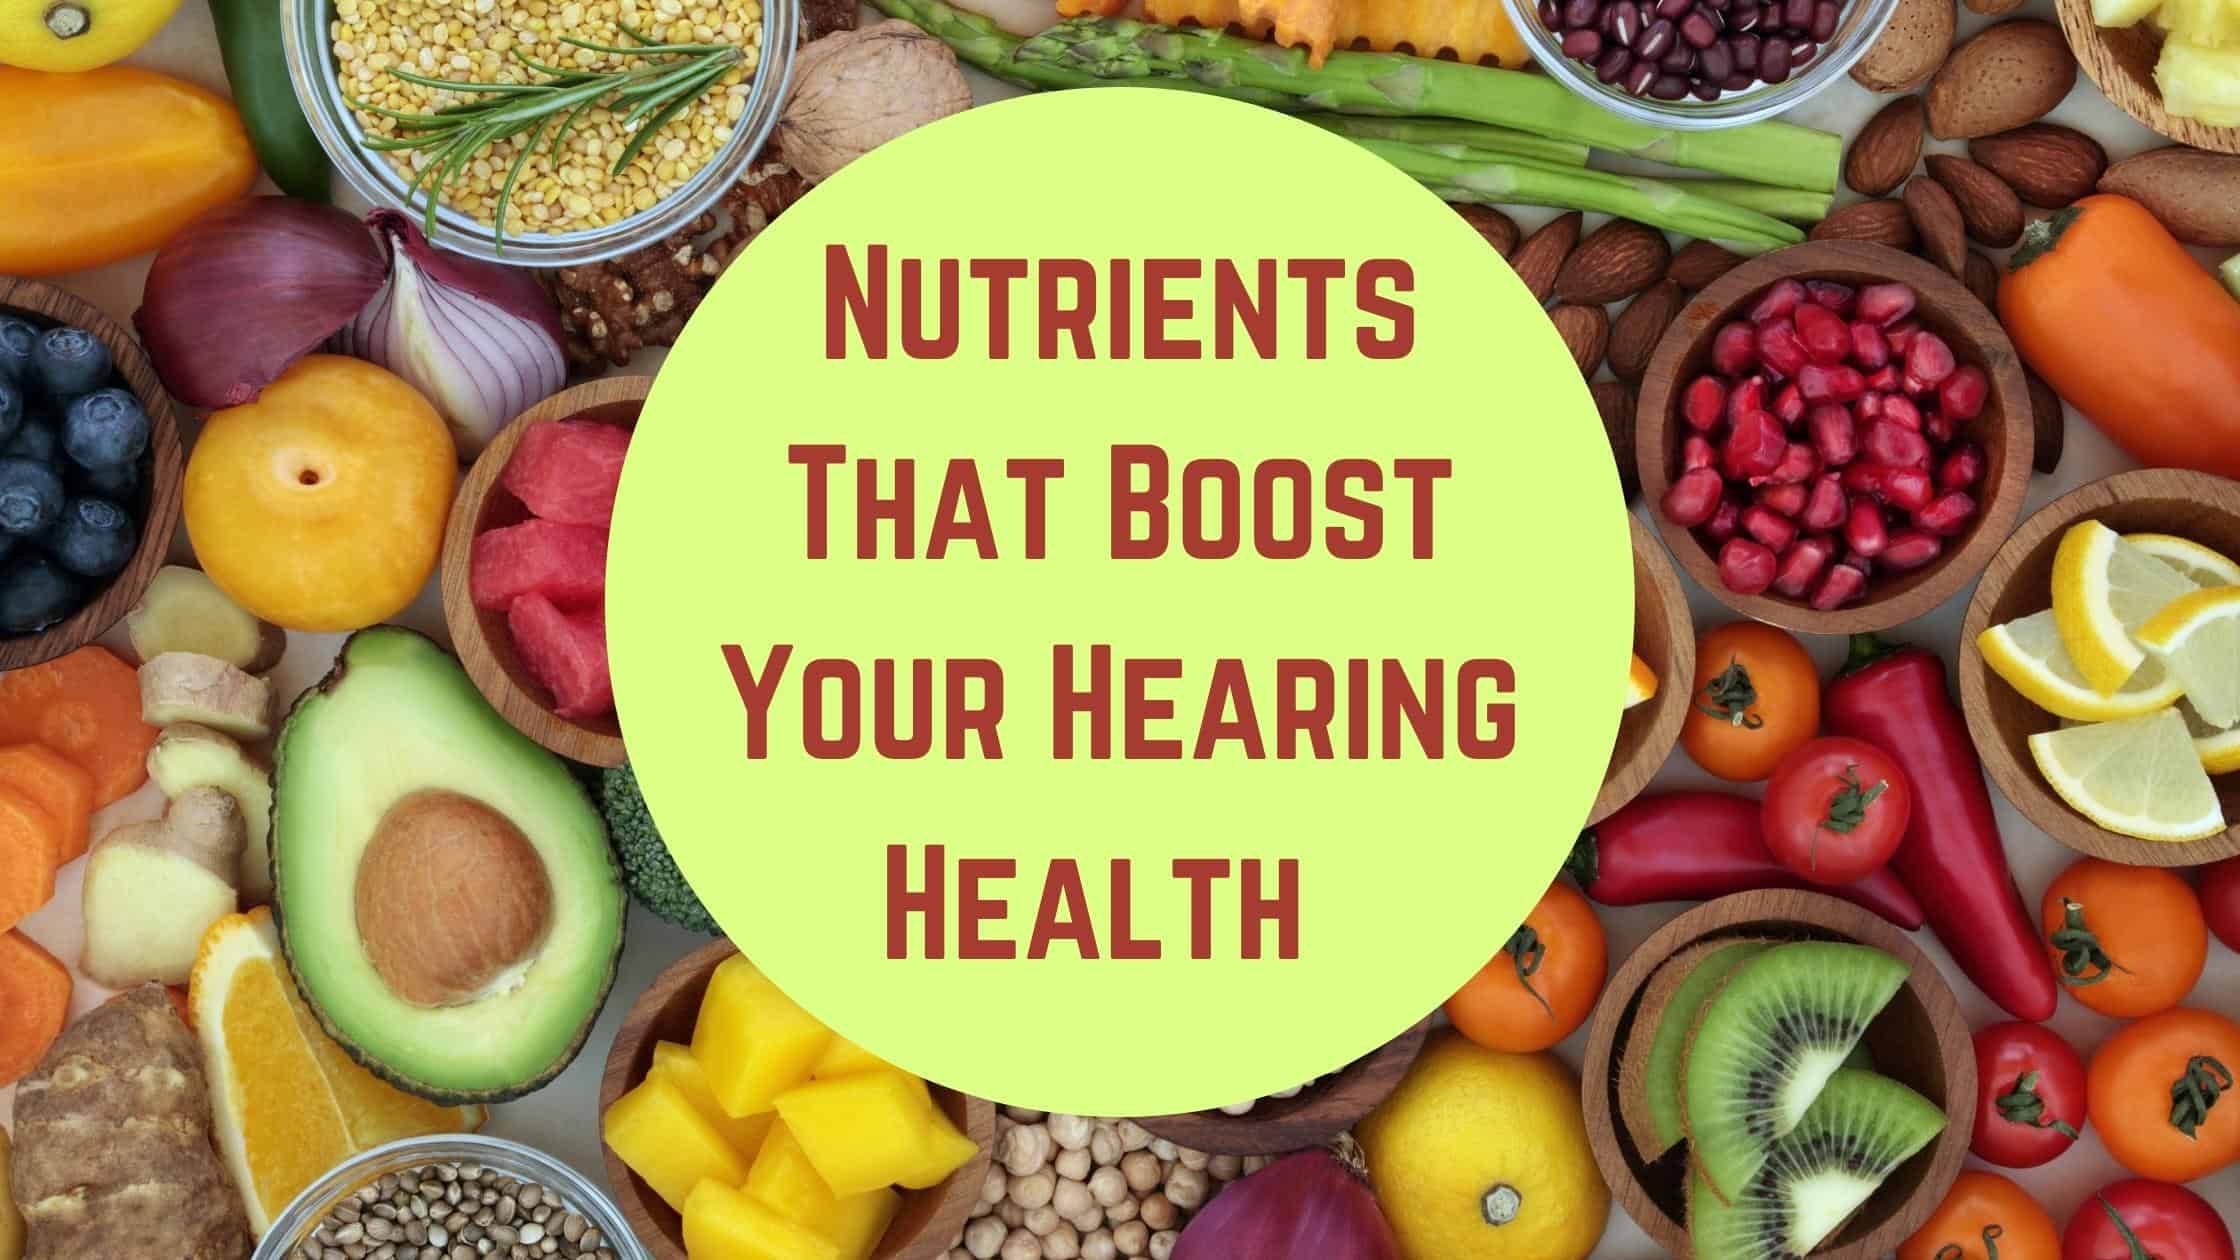 Nutrients that boost your hearing health